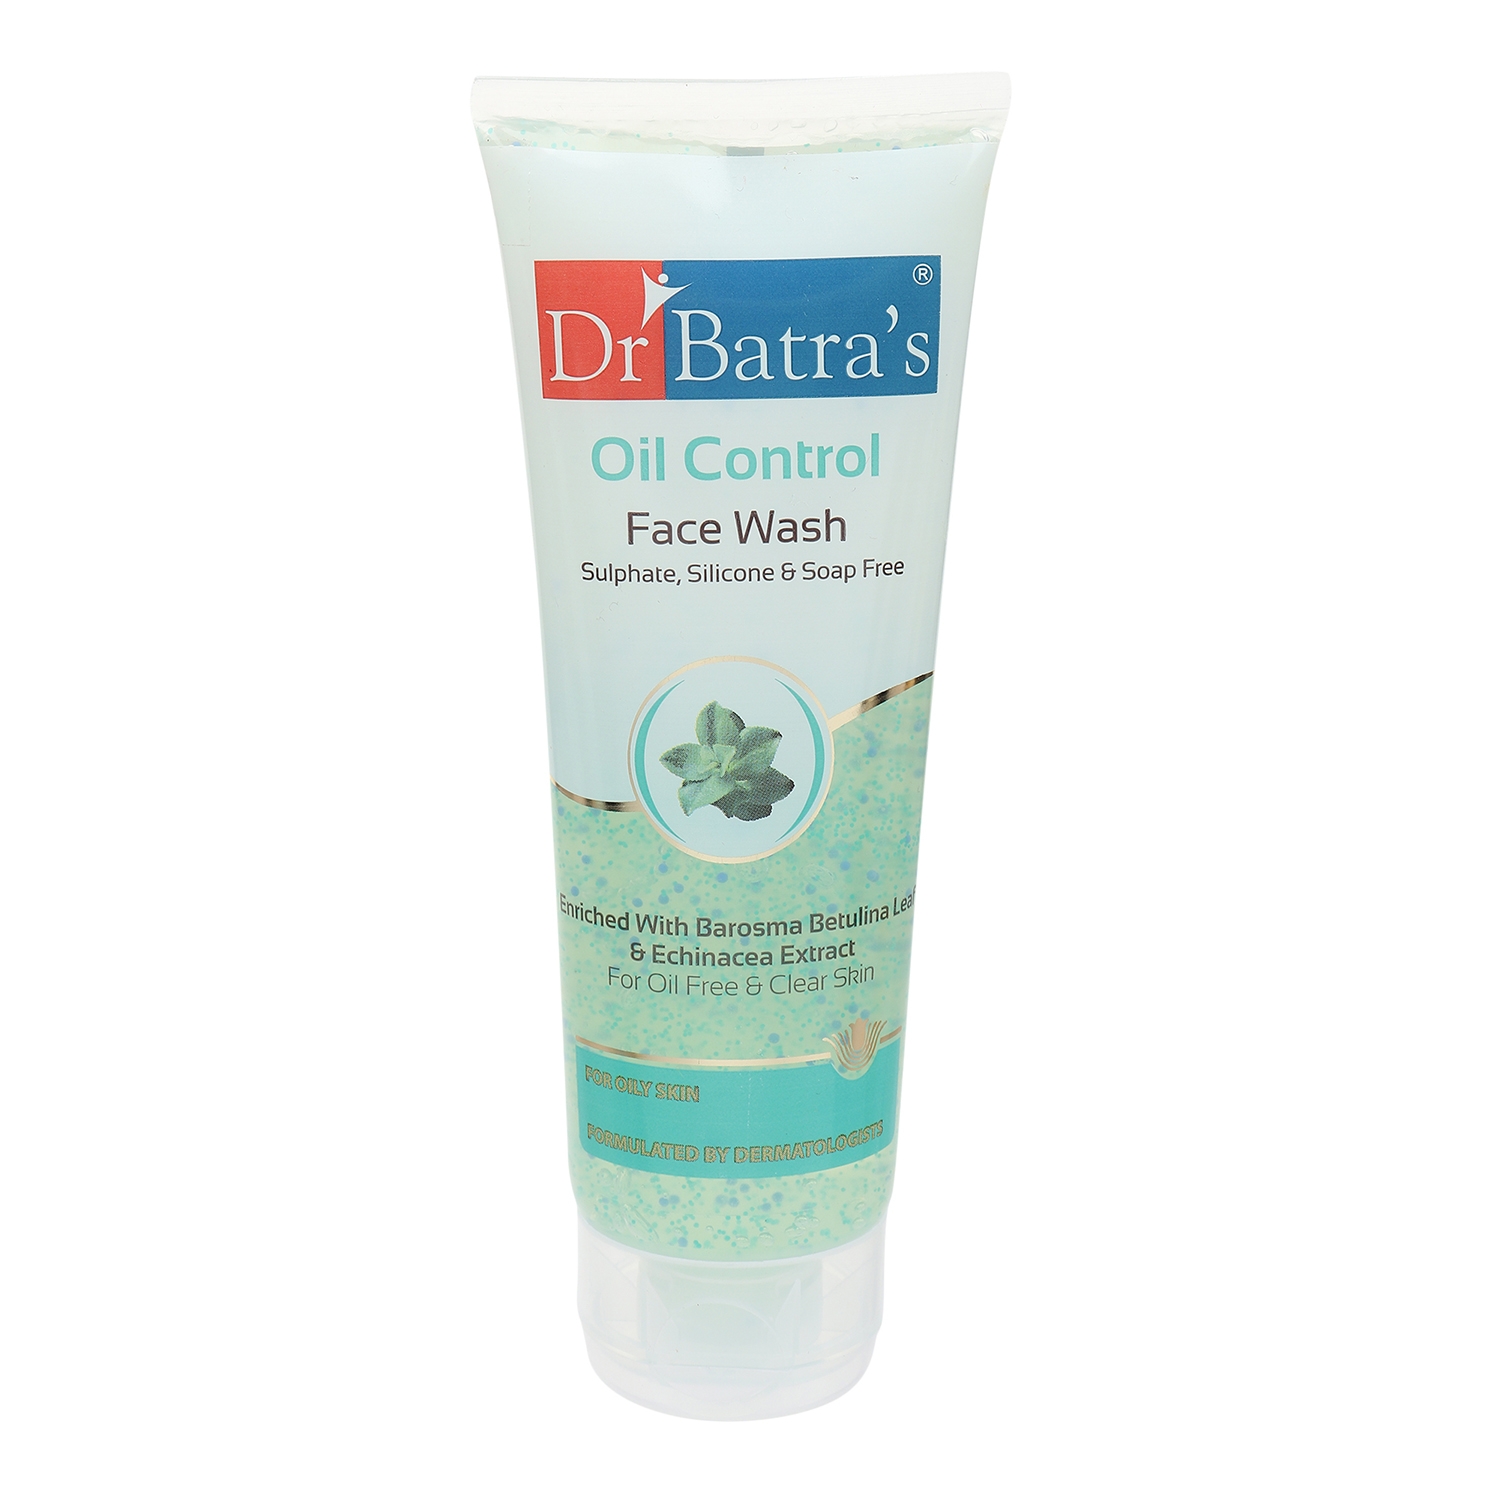 Dr Batra's | Dr Batra's Oil Control Face Wash Sulphate, Silicone & Soap Free Enriched With Barosma Betulina Leaf & Echinancea Extract For Oil Free & Clear Skin - 100 gm